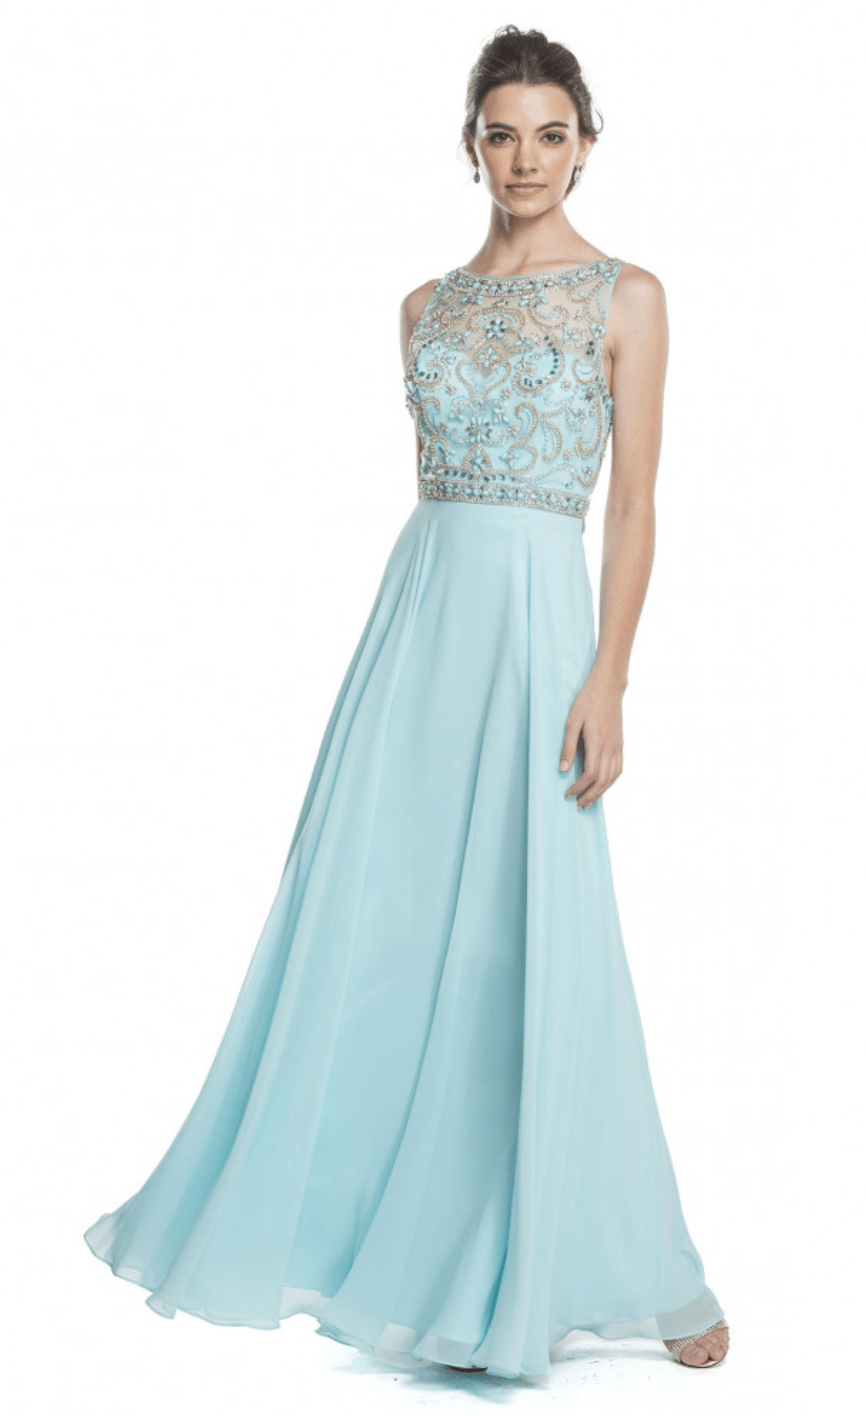 Sparkling Crystal Beaded Chiffon Dress by Aspeed - NORMA REED